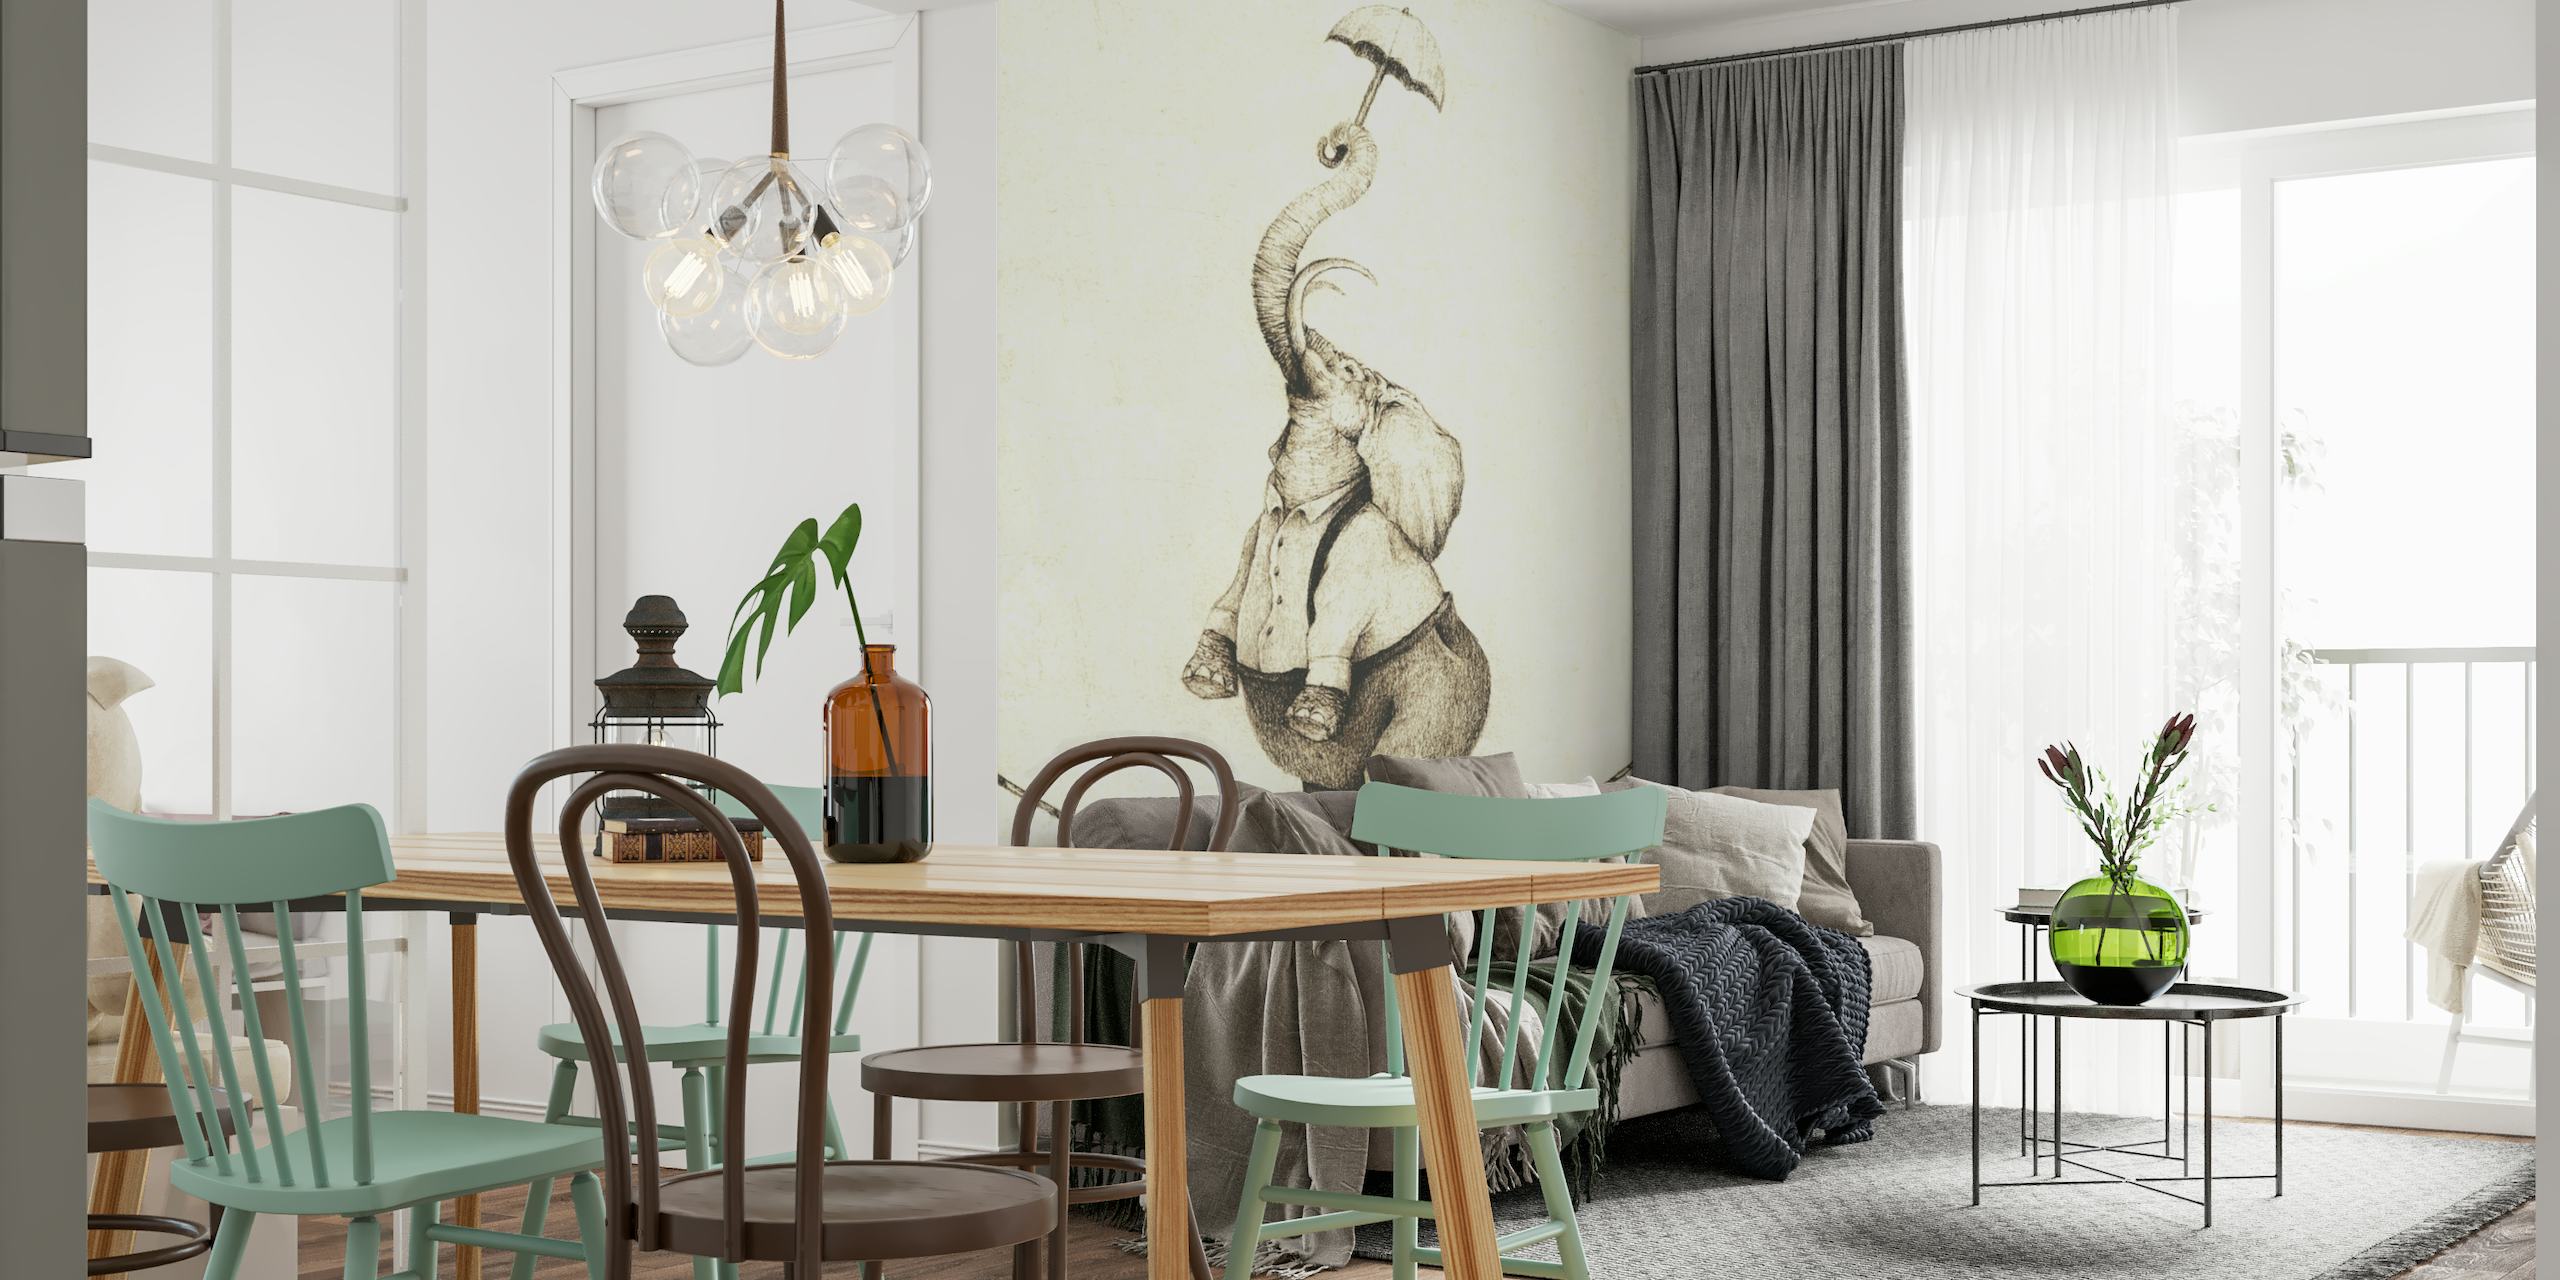 Elliot II wall mural of a hand-drawn elephant on a unicycle with an umbrella